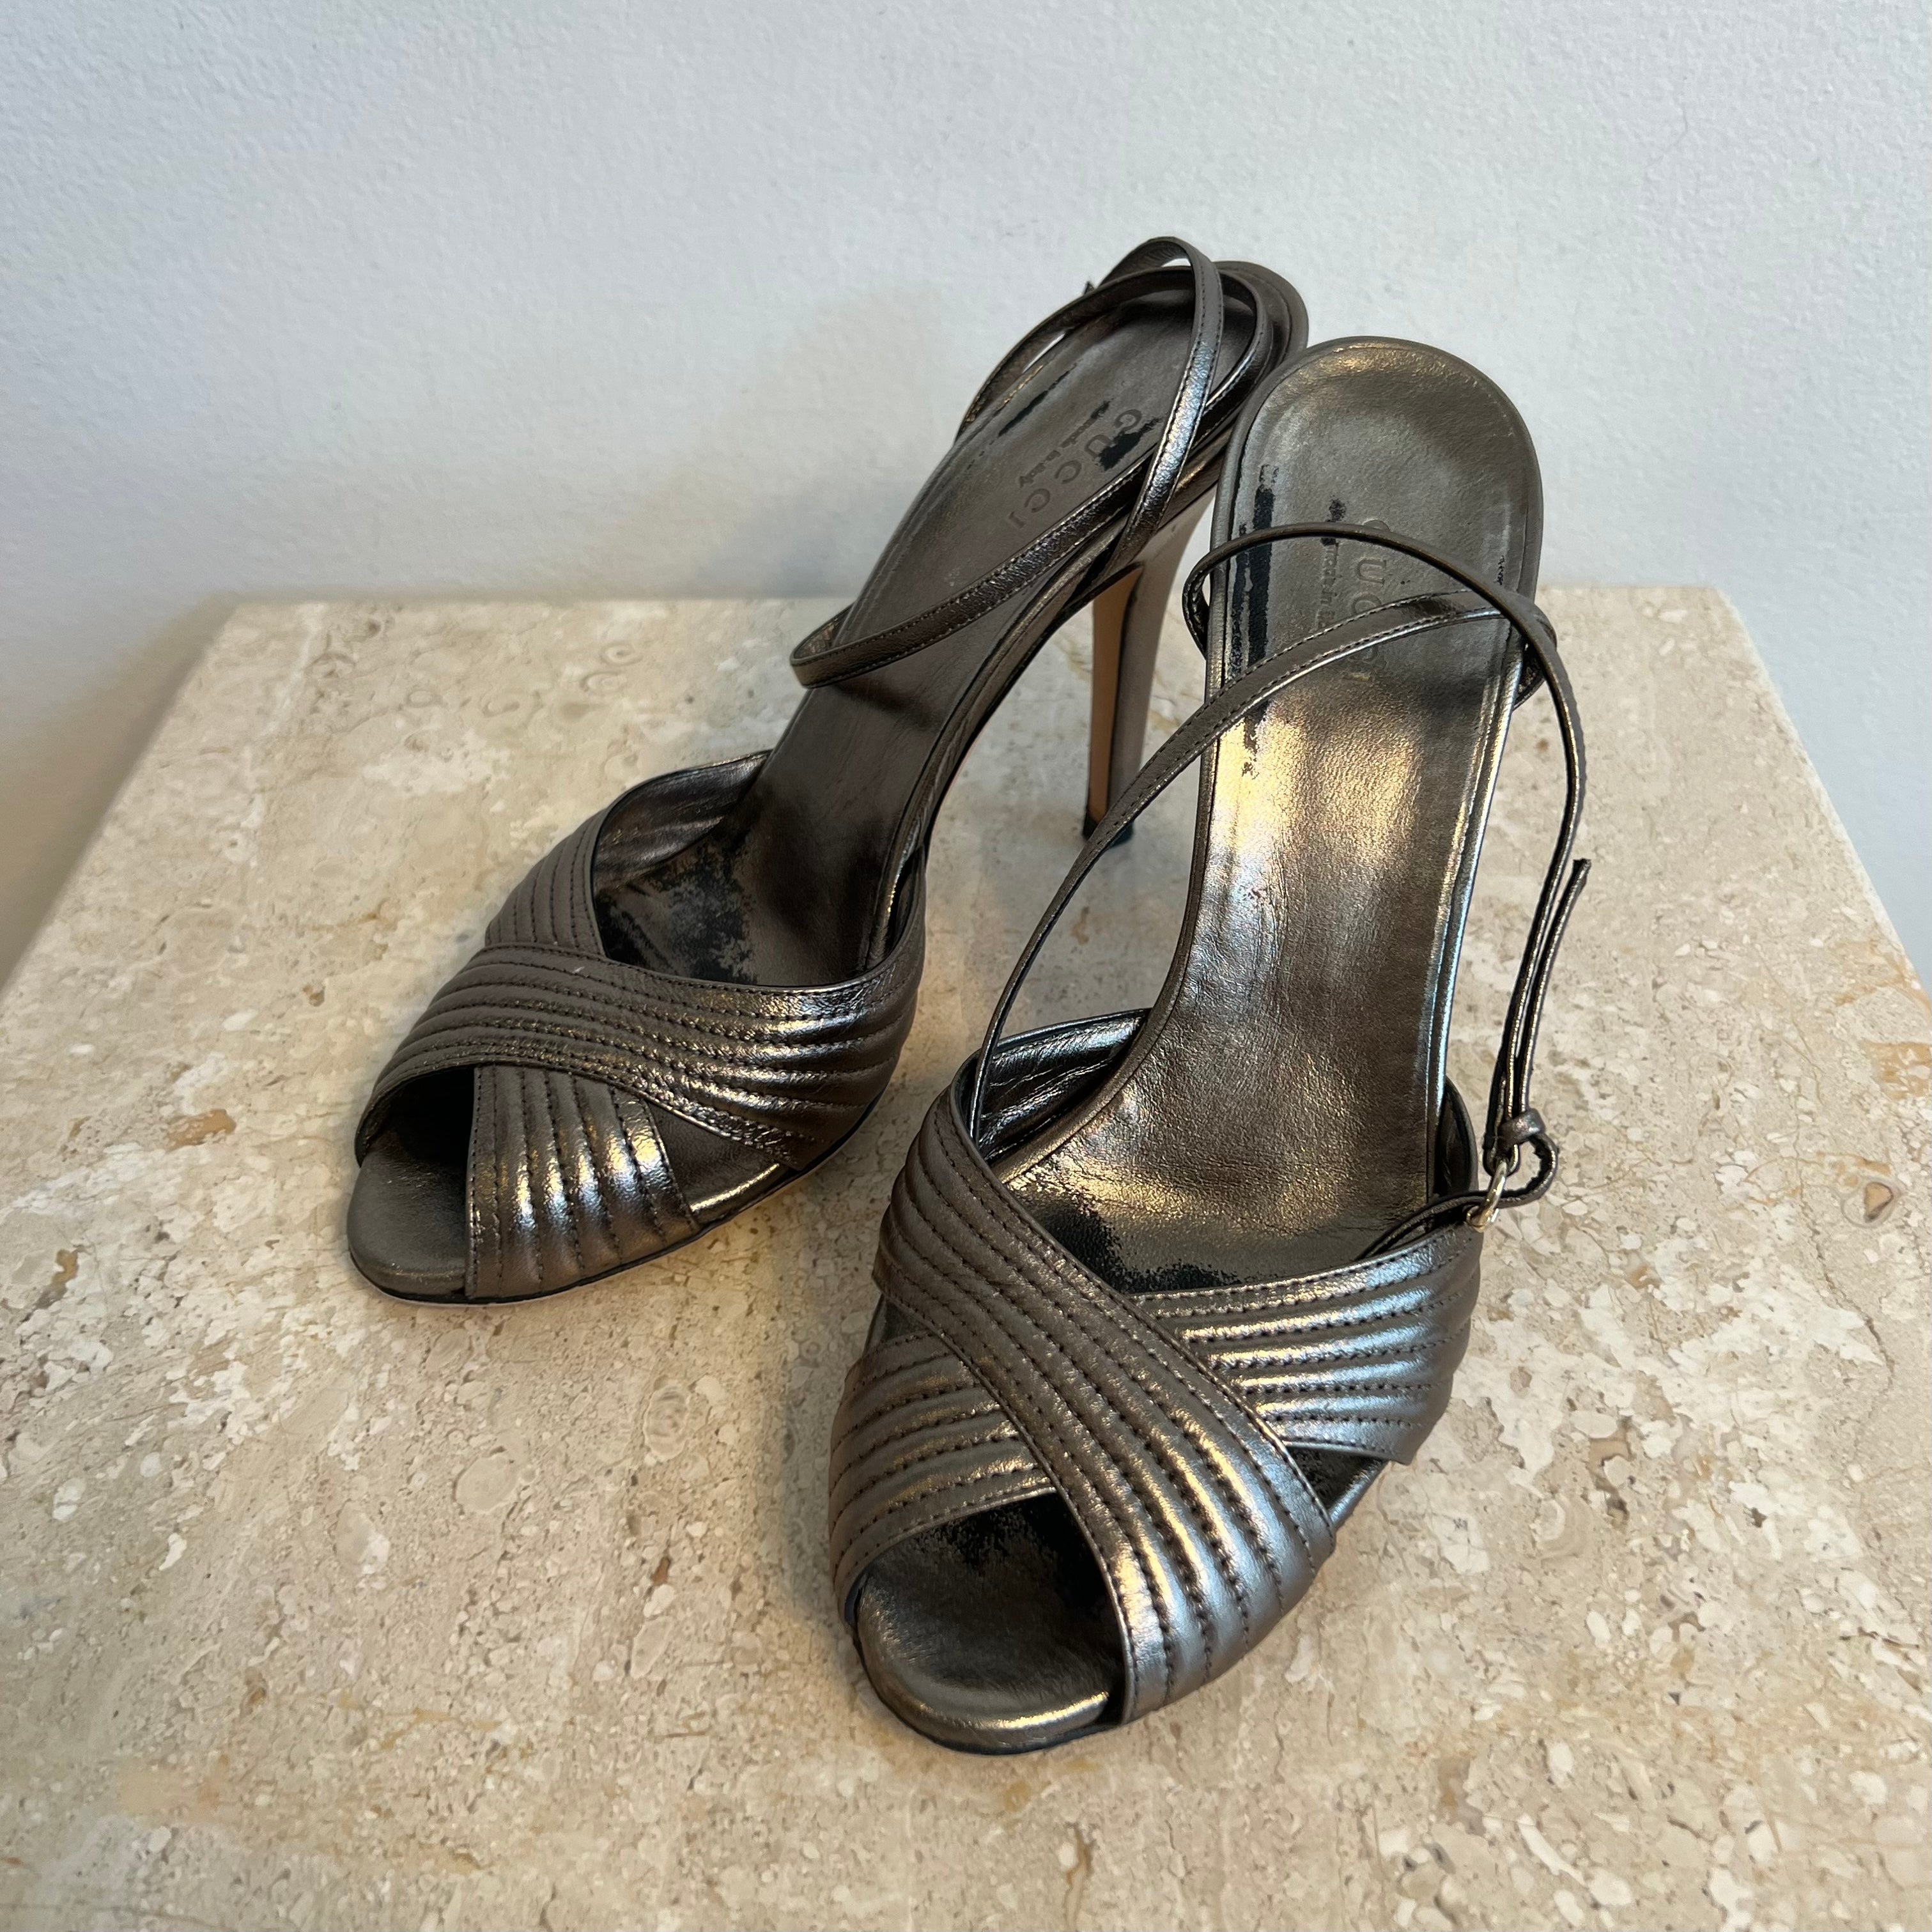 Pre-Owned GUCCI Bronze Leather Strappy Sandal - Size 7.5